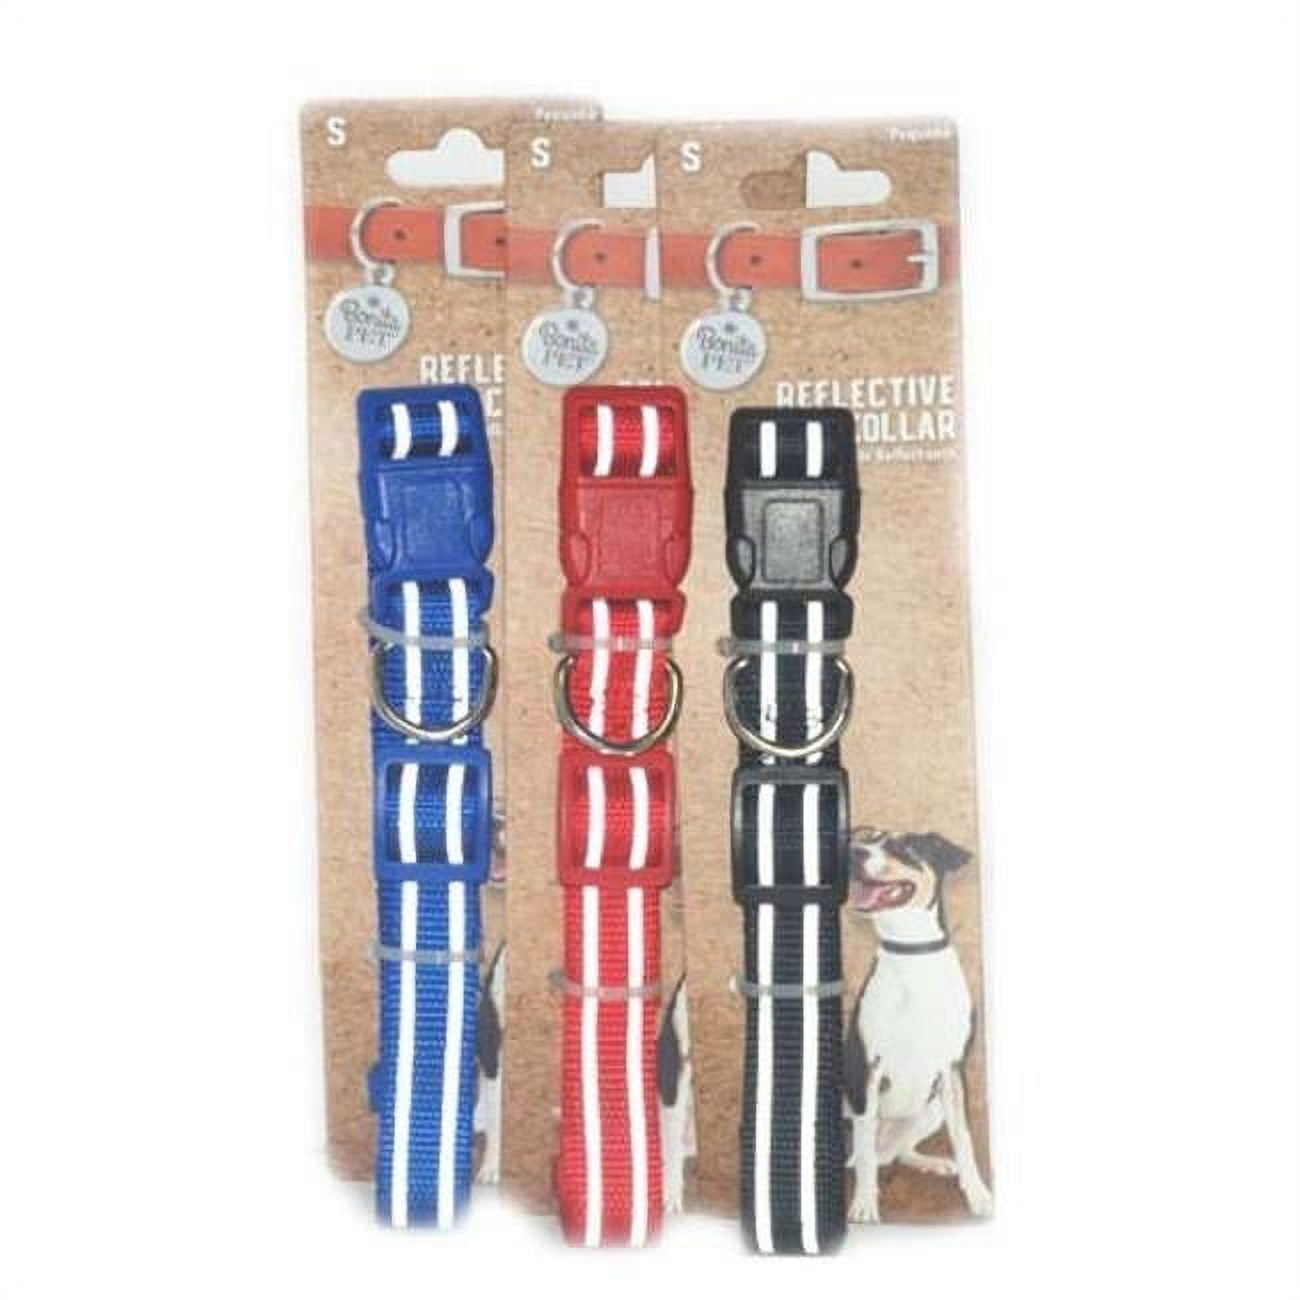 Picture of DDI 2324548 Reflective Collars - 3 Colors Case of 96